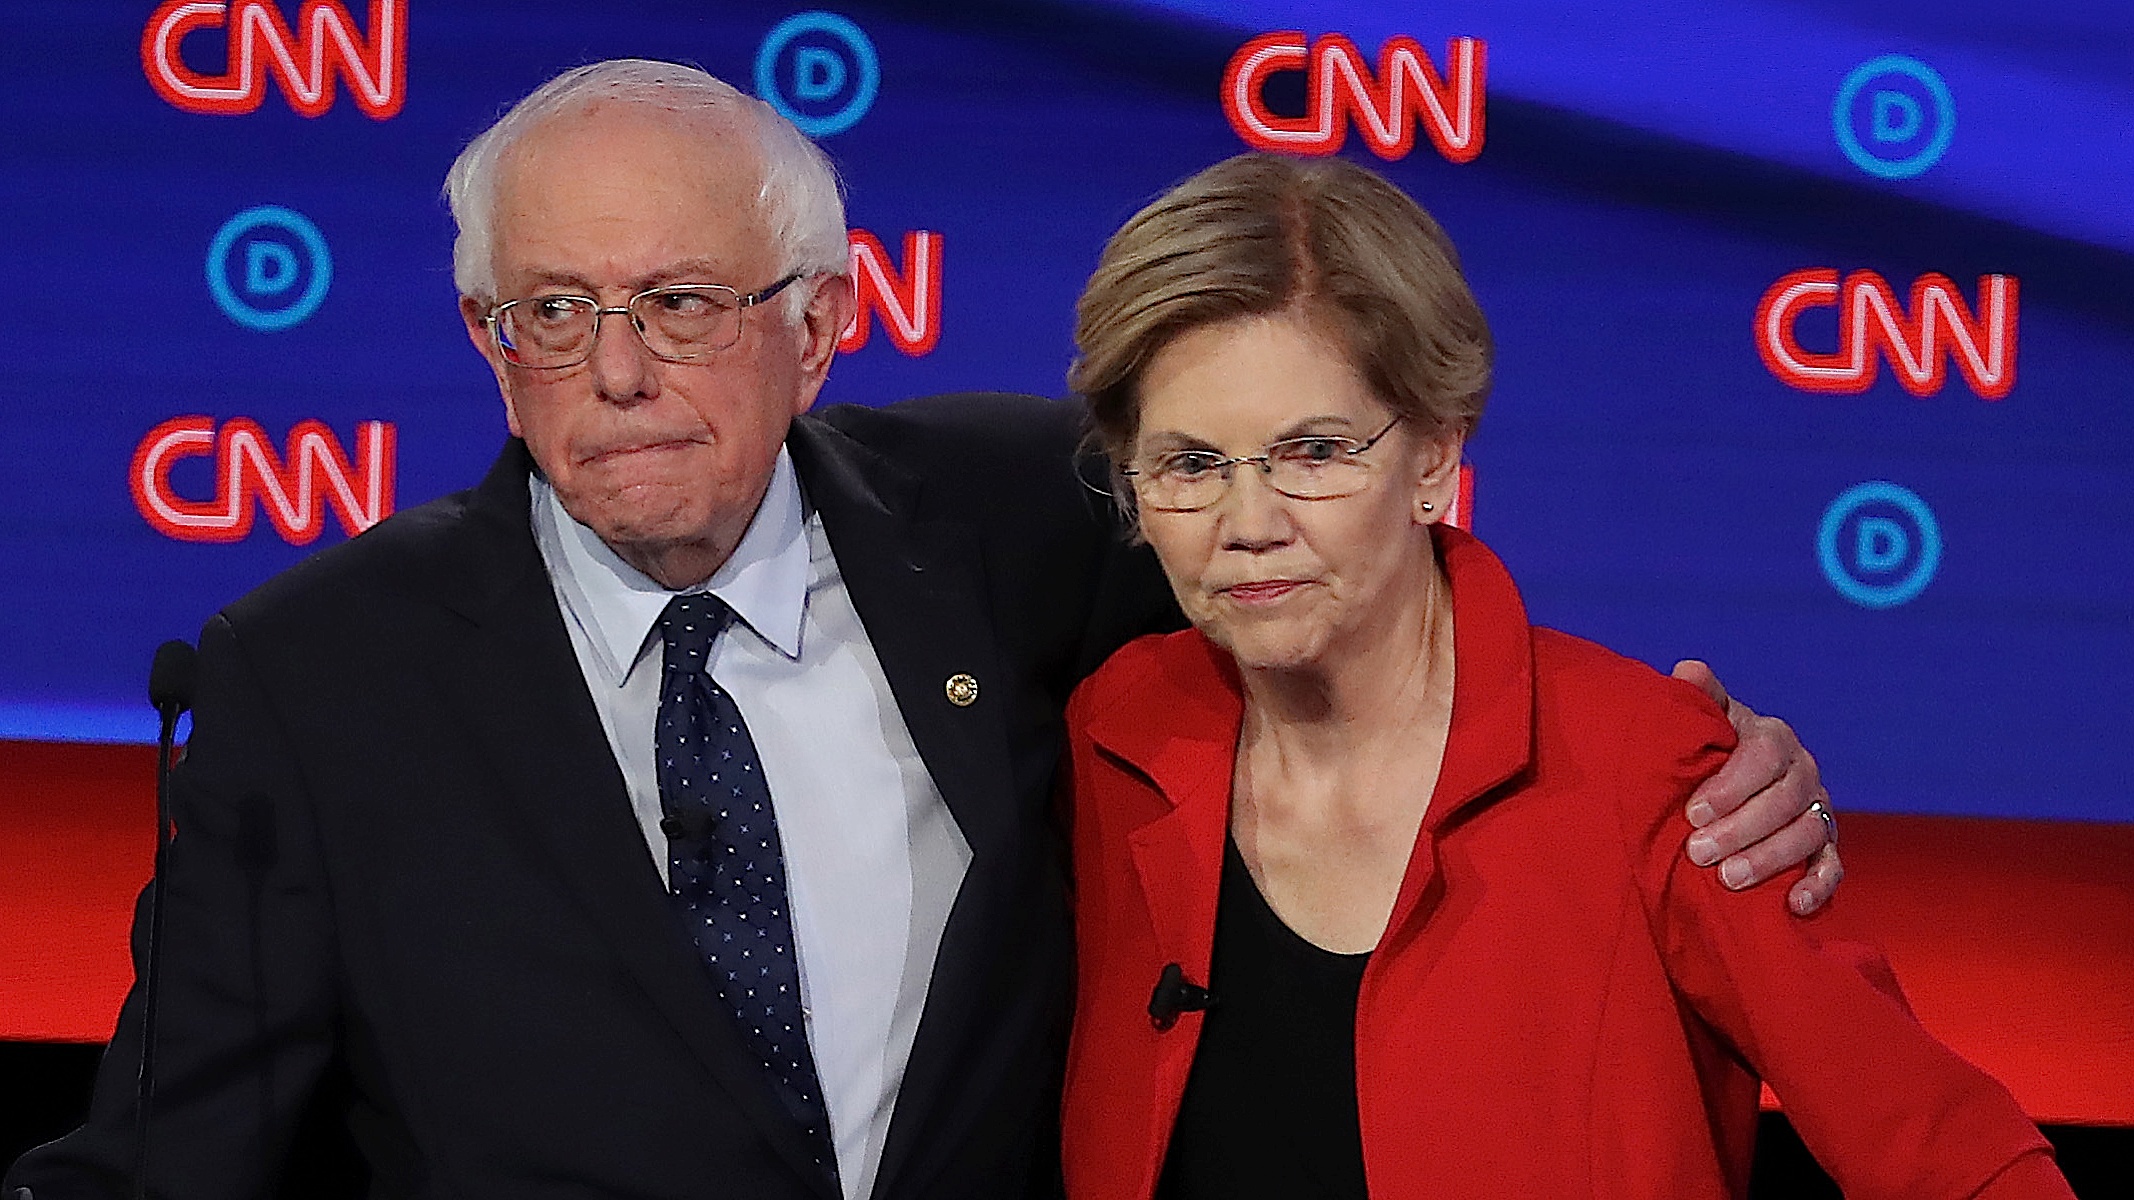 A Nevada Culinary Union Tried to Lay a Trap for Bernie Sanders, and Elizabeth Warren Played Along